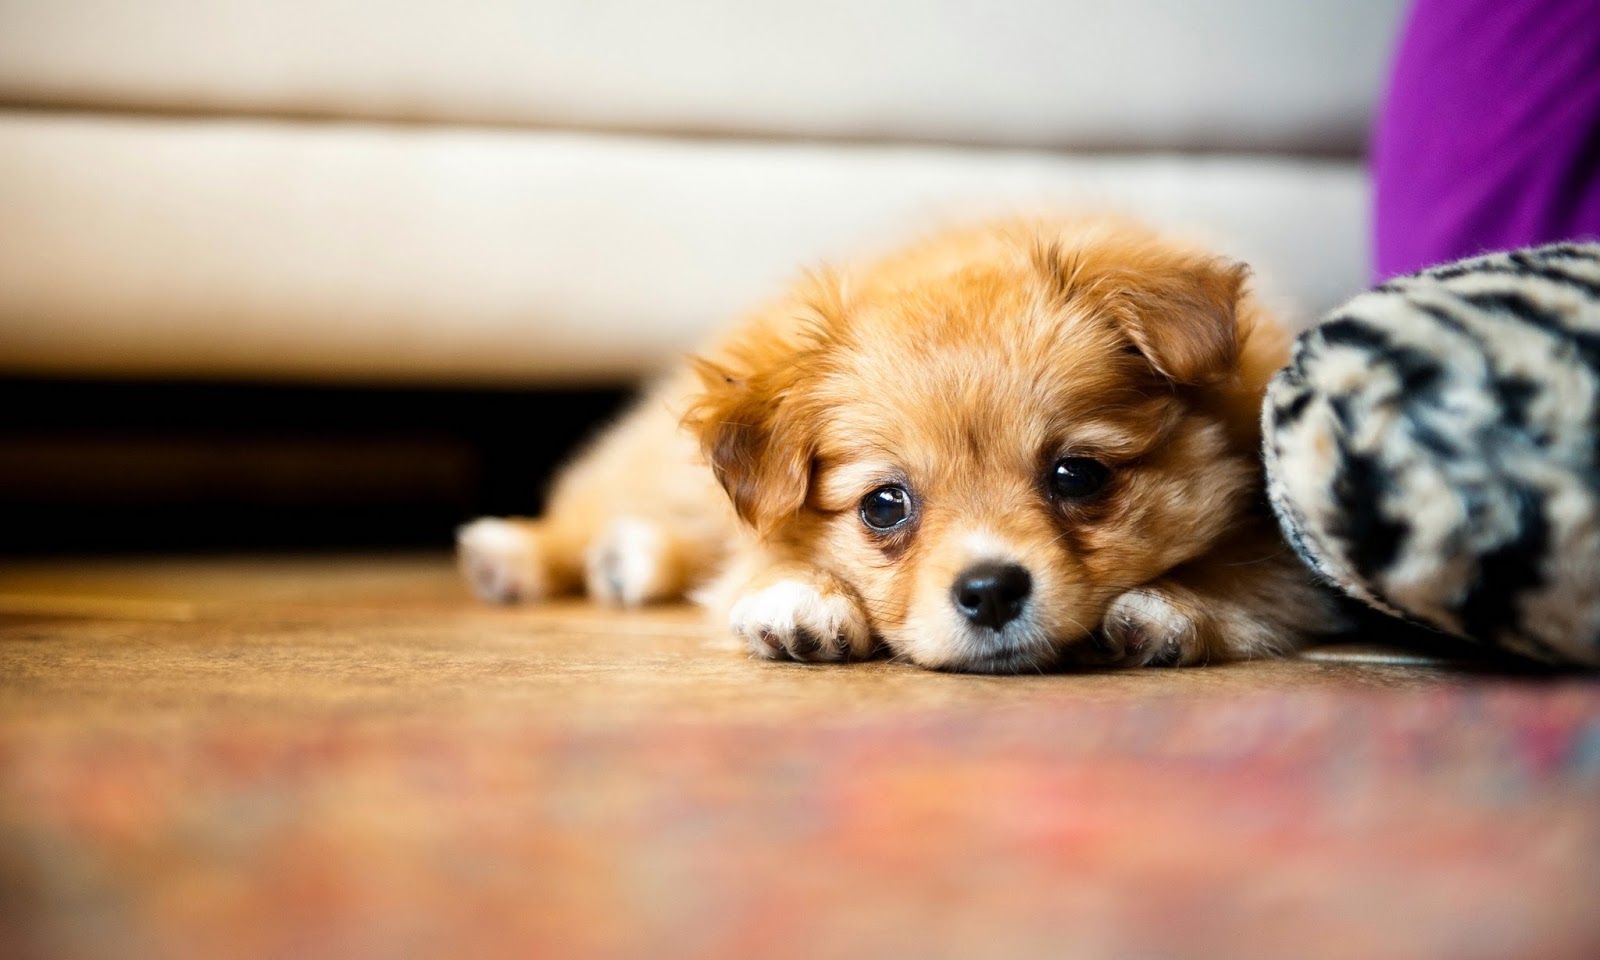 Puppy Photography 1080p Wallpapers HD Wallpapers High